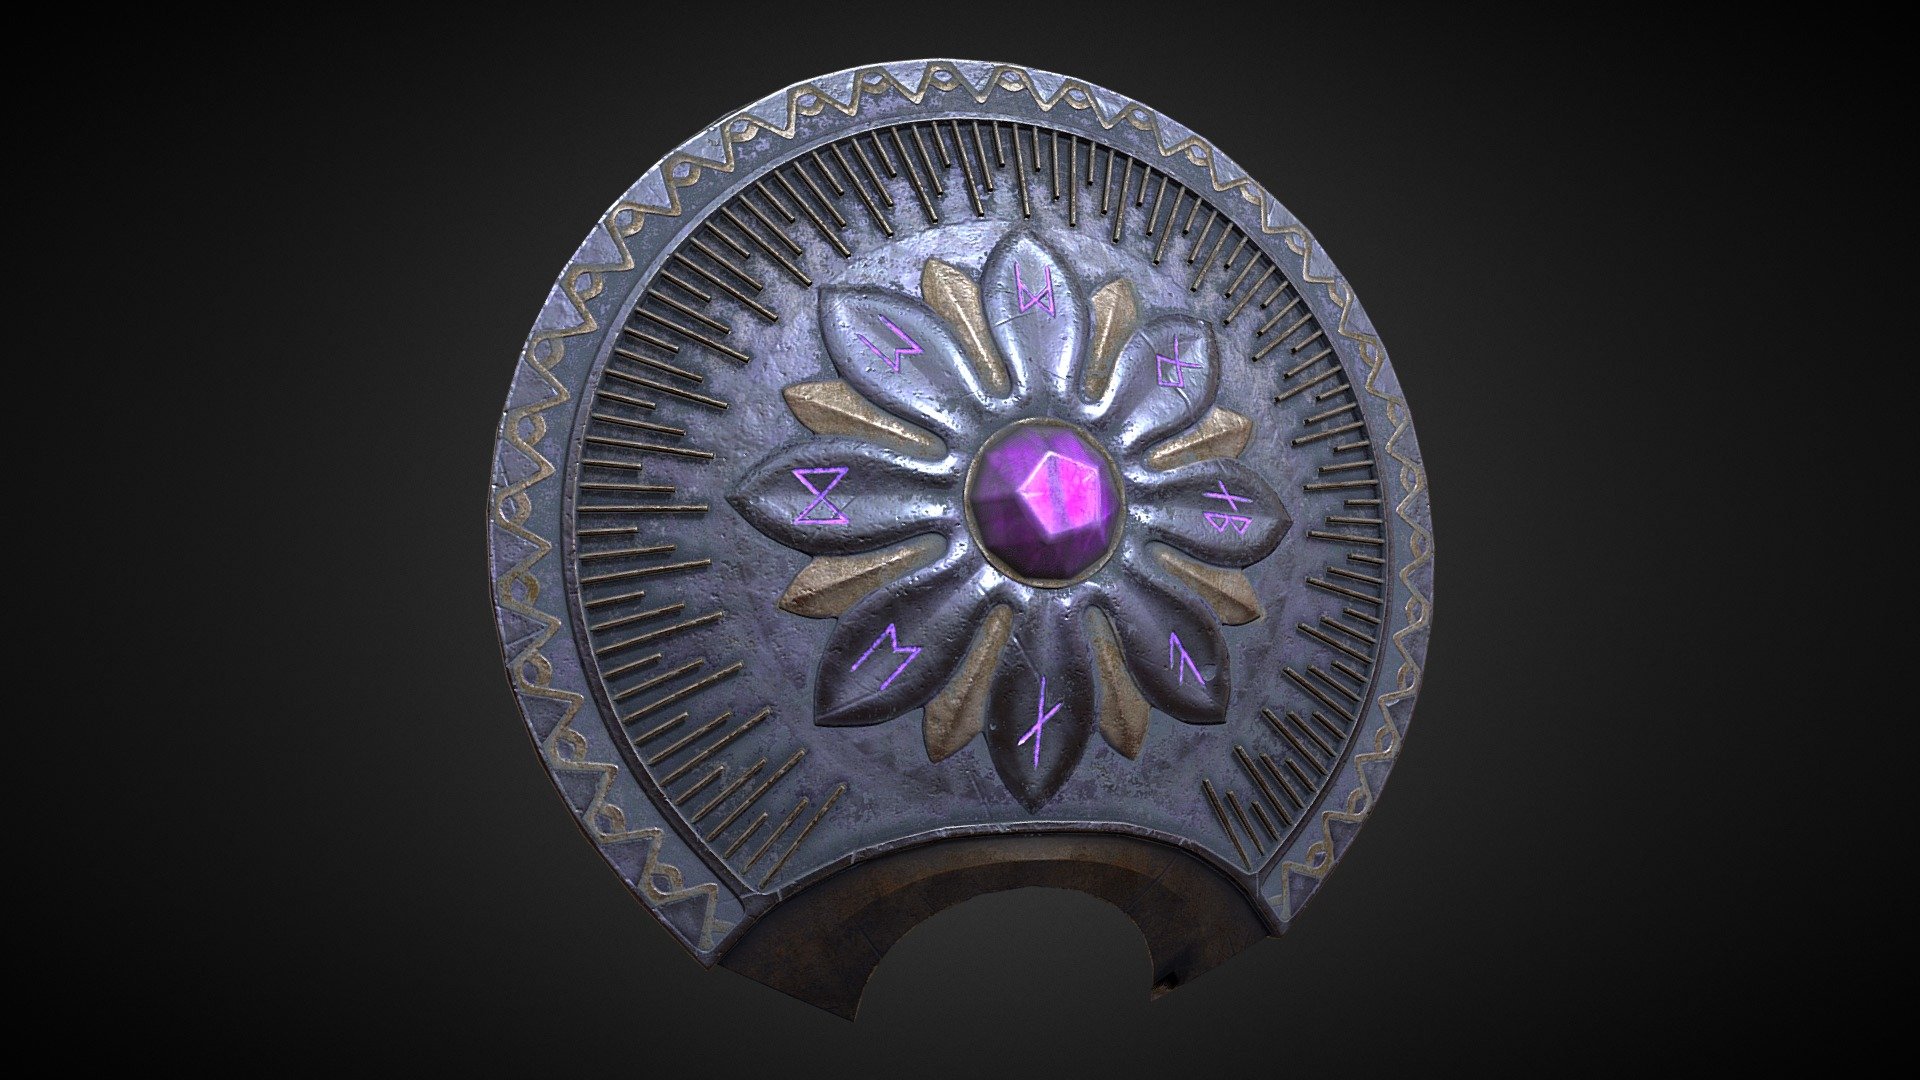 Commissioned by Terrornaut for the Deadlands Mod for Conan Exiles, Unreal texture included. 
Visit their Discord@https://discord.gg/Z5xypB

Another commssion. A greek shield with it's spear rest modified into a guillotine, making it a lethal weapon.

The commissioner speficically ask for viking runes on the shield, indicating this equipment has been smithed and used throughout the edges. The runes spelled &ldquo;Demonbane.